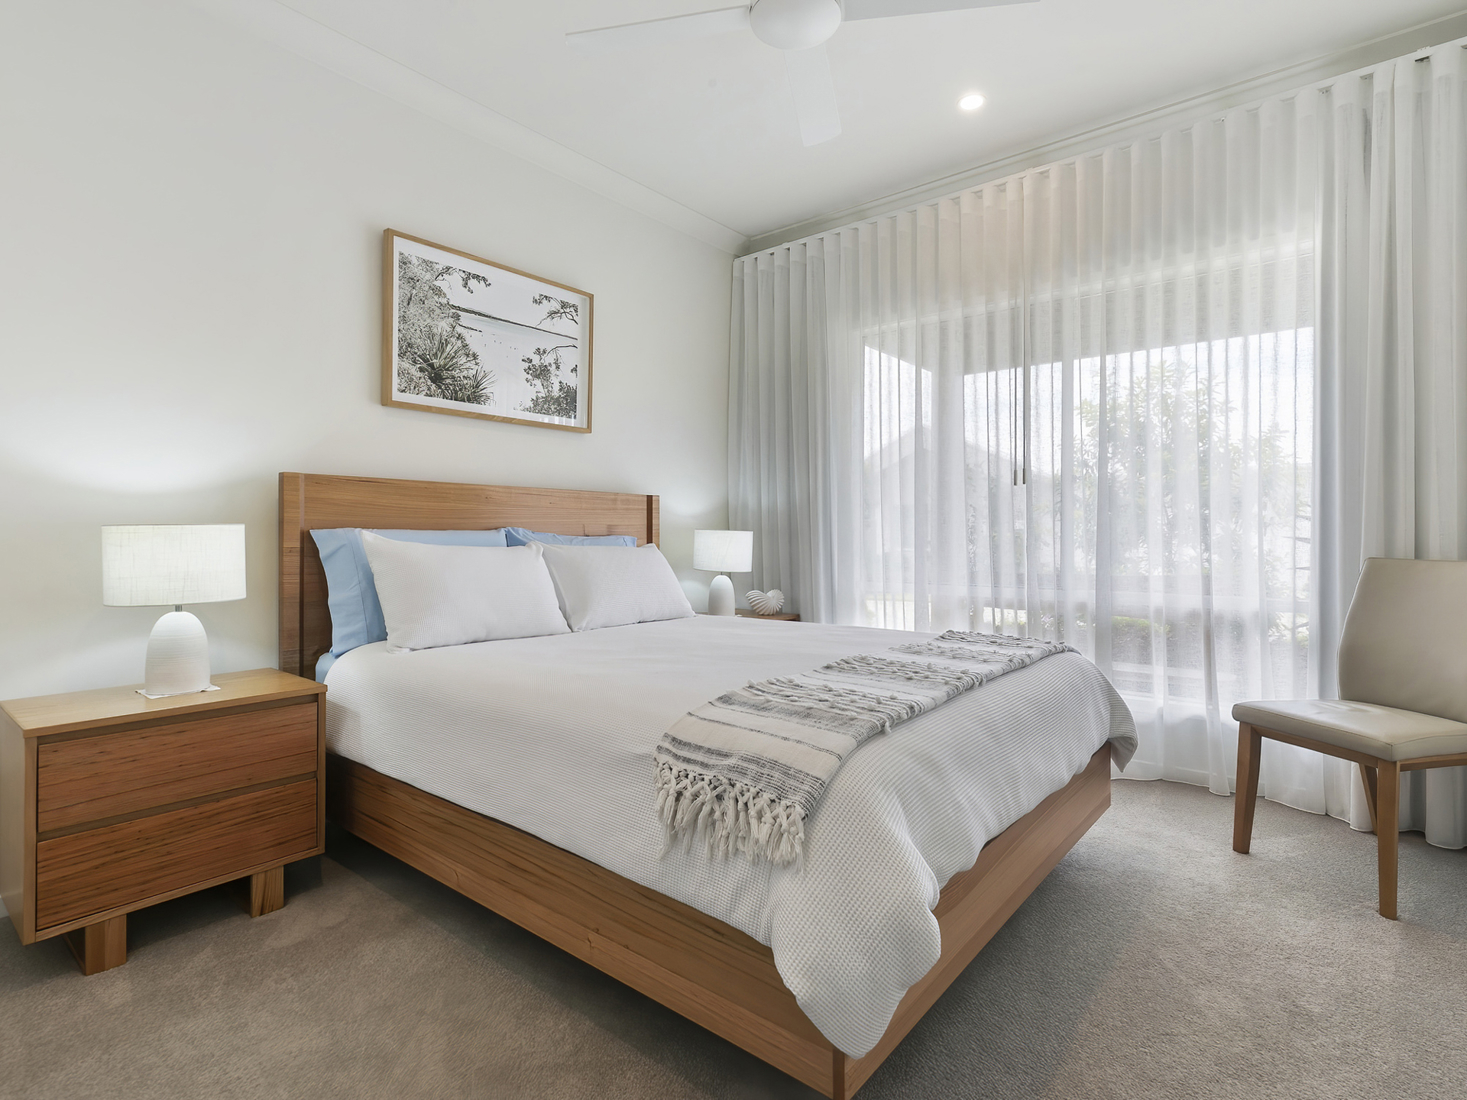 second master bedroom with timber bedroom furniture suite, beige walls and white bedspread.